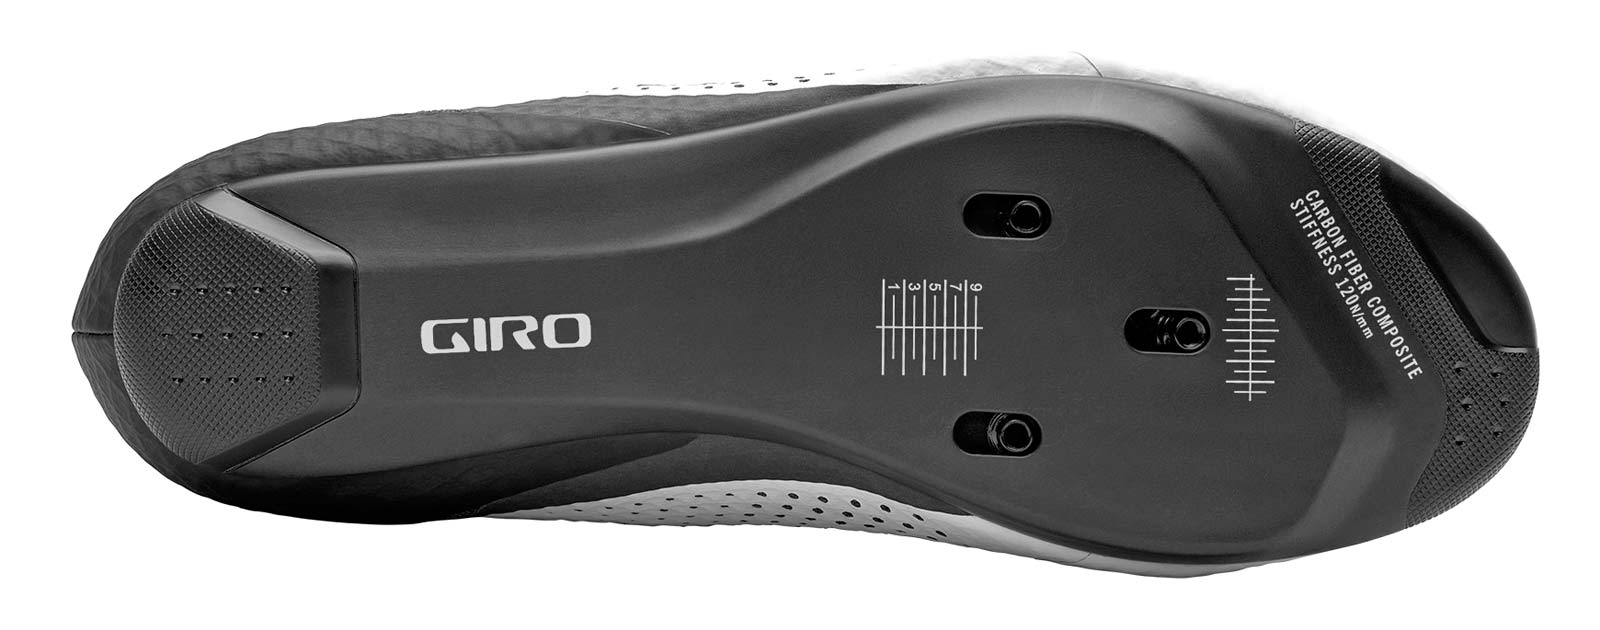 Giro Regime high performance road shoes at a mid-level price, carbon composite sole